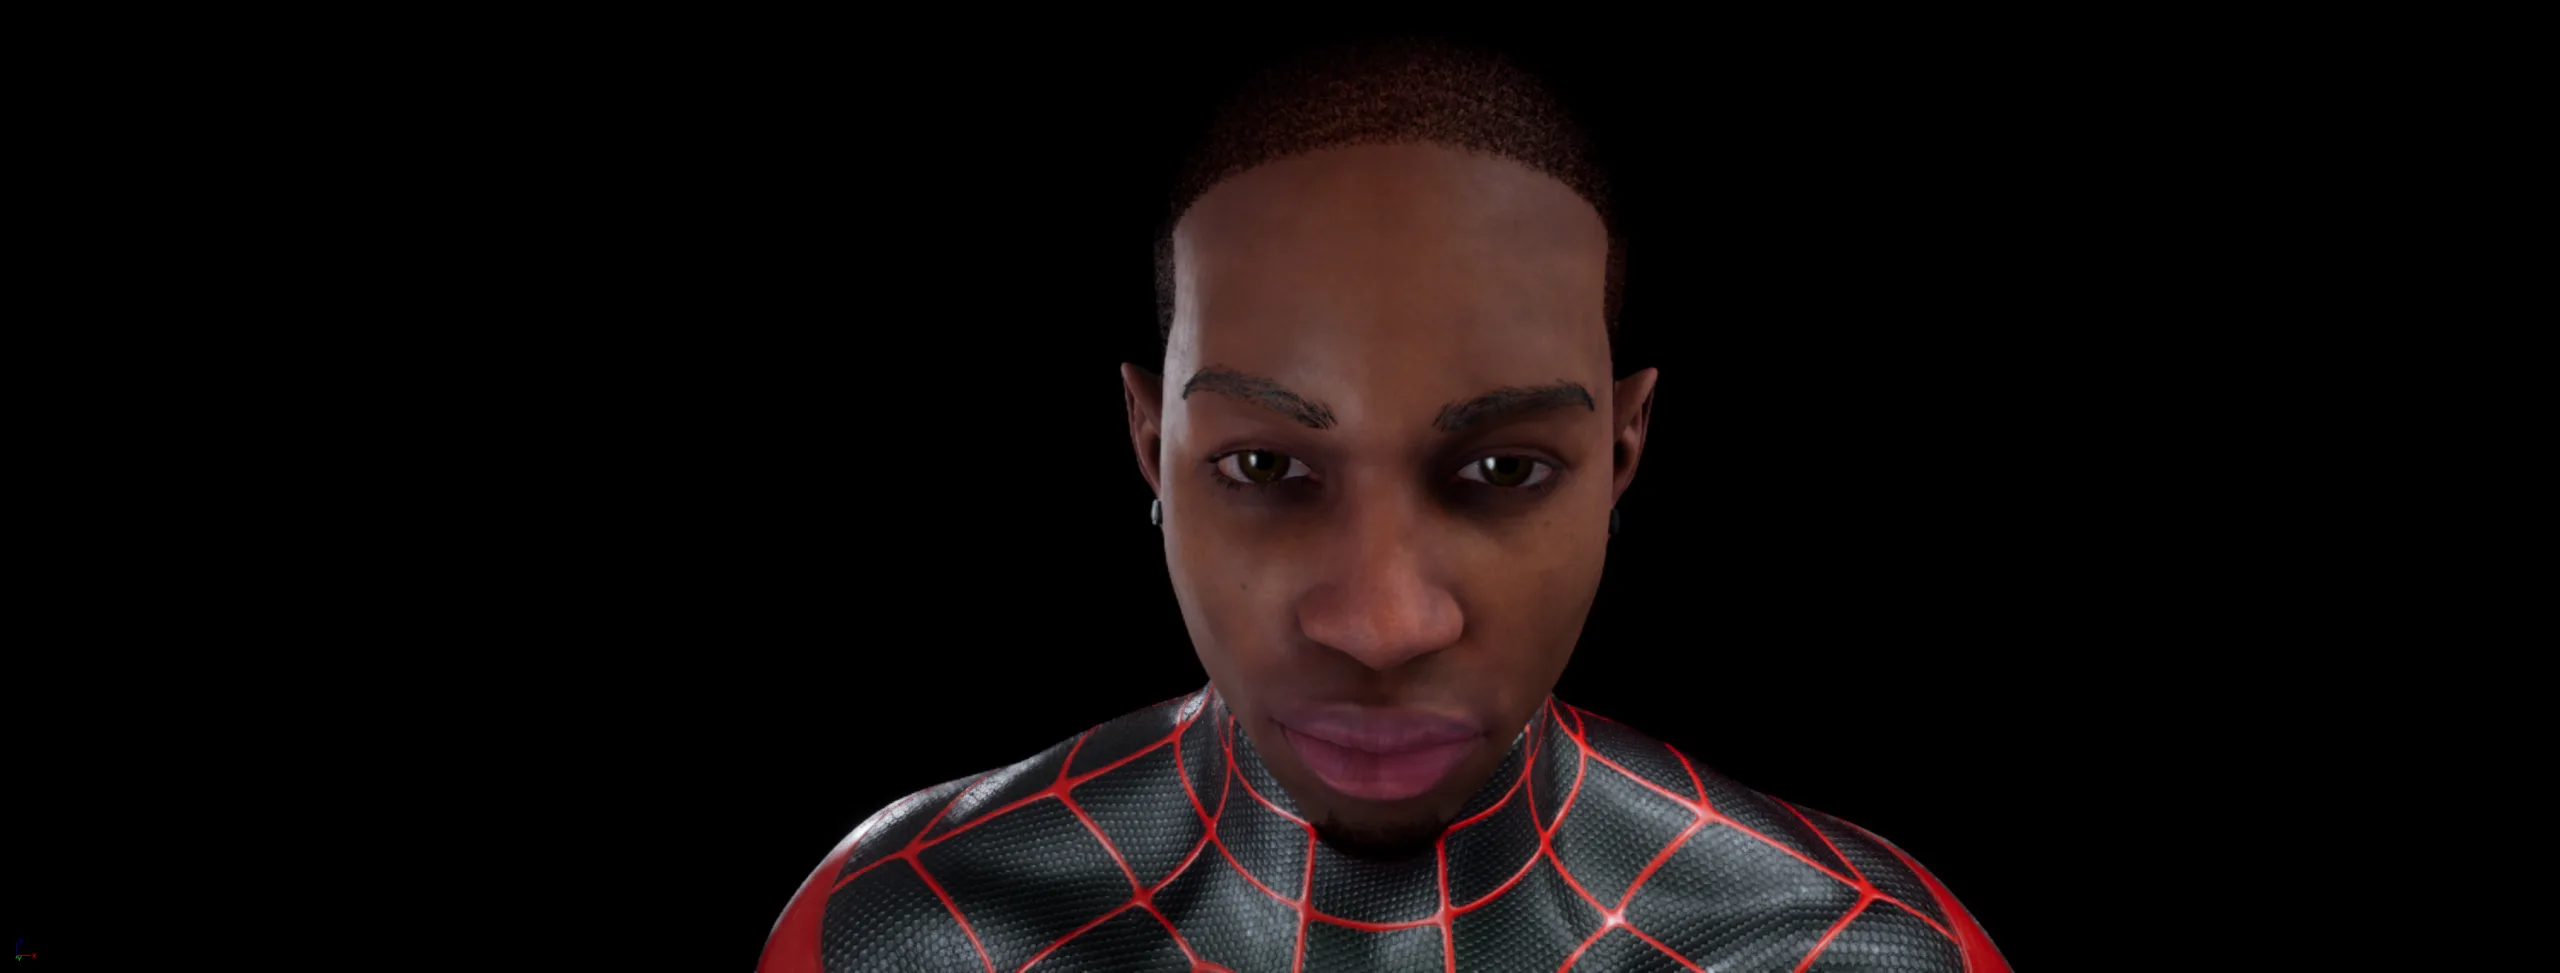 Real-time Black Skin Look Dev - Project Files + Free Skin Shader